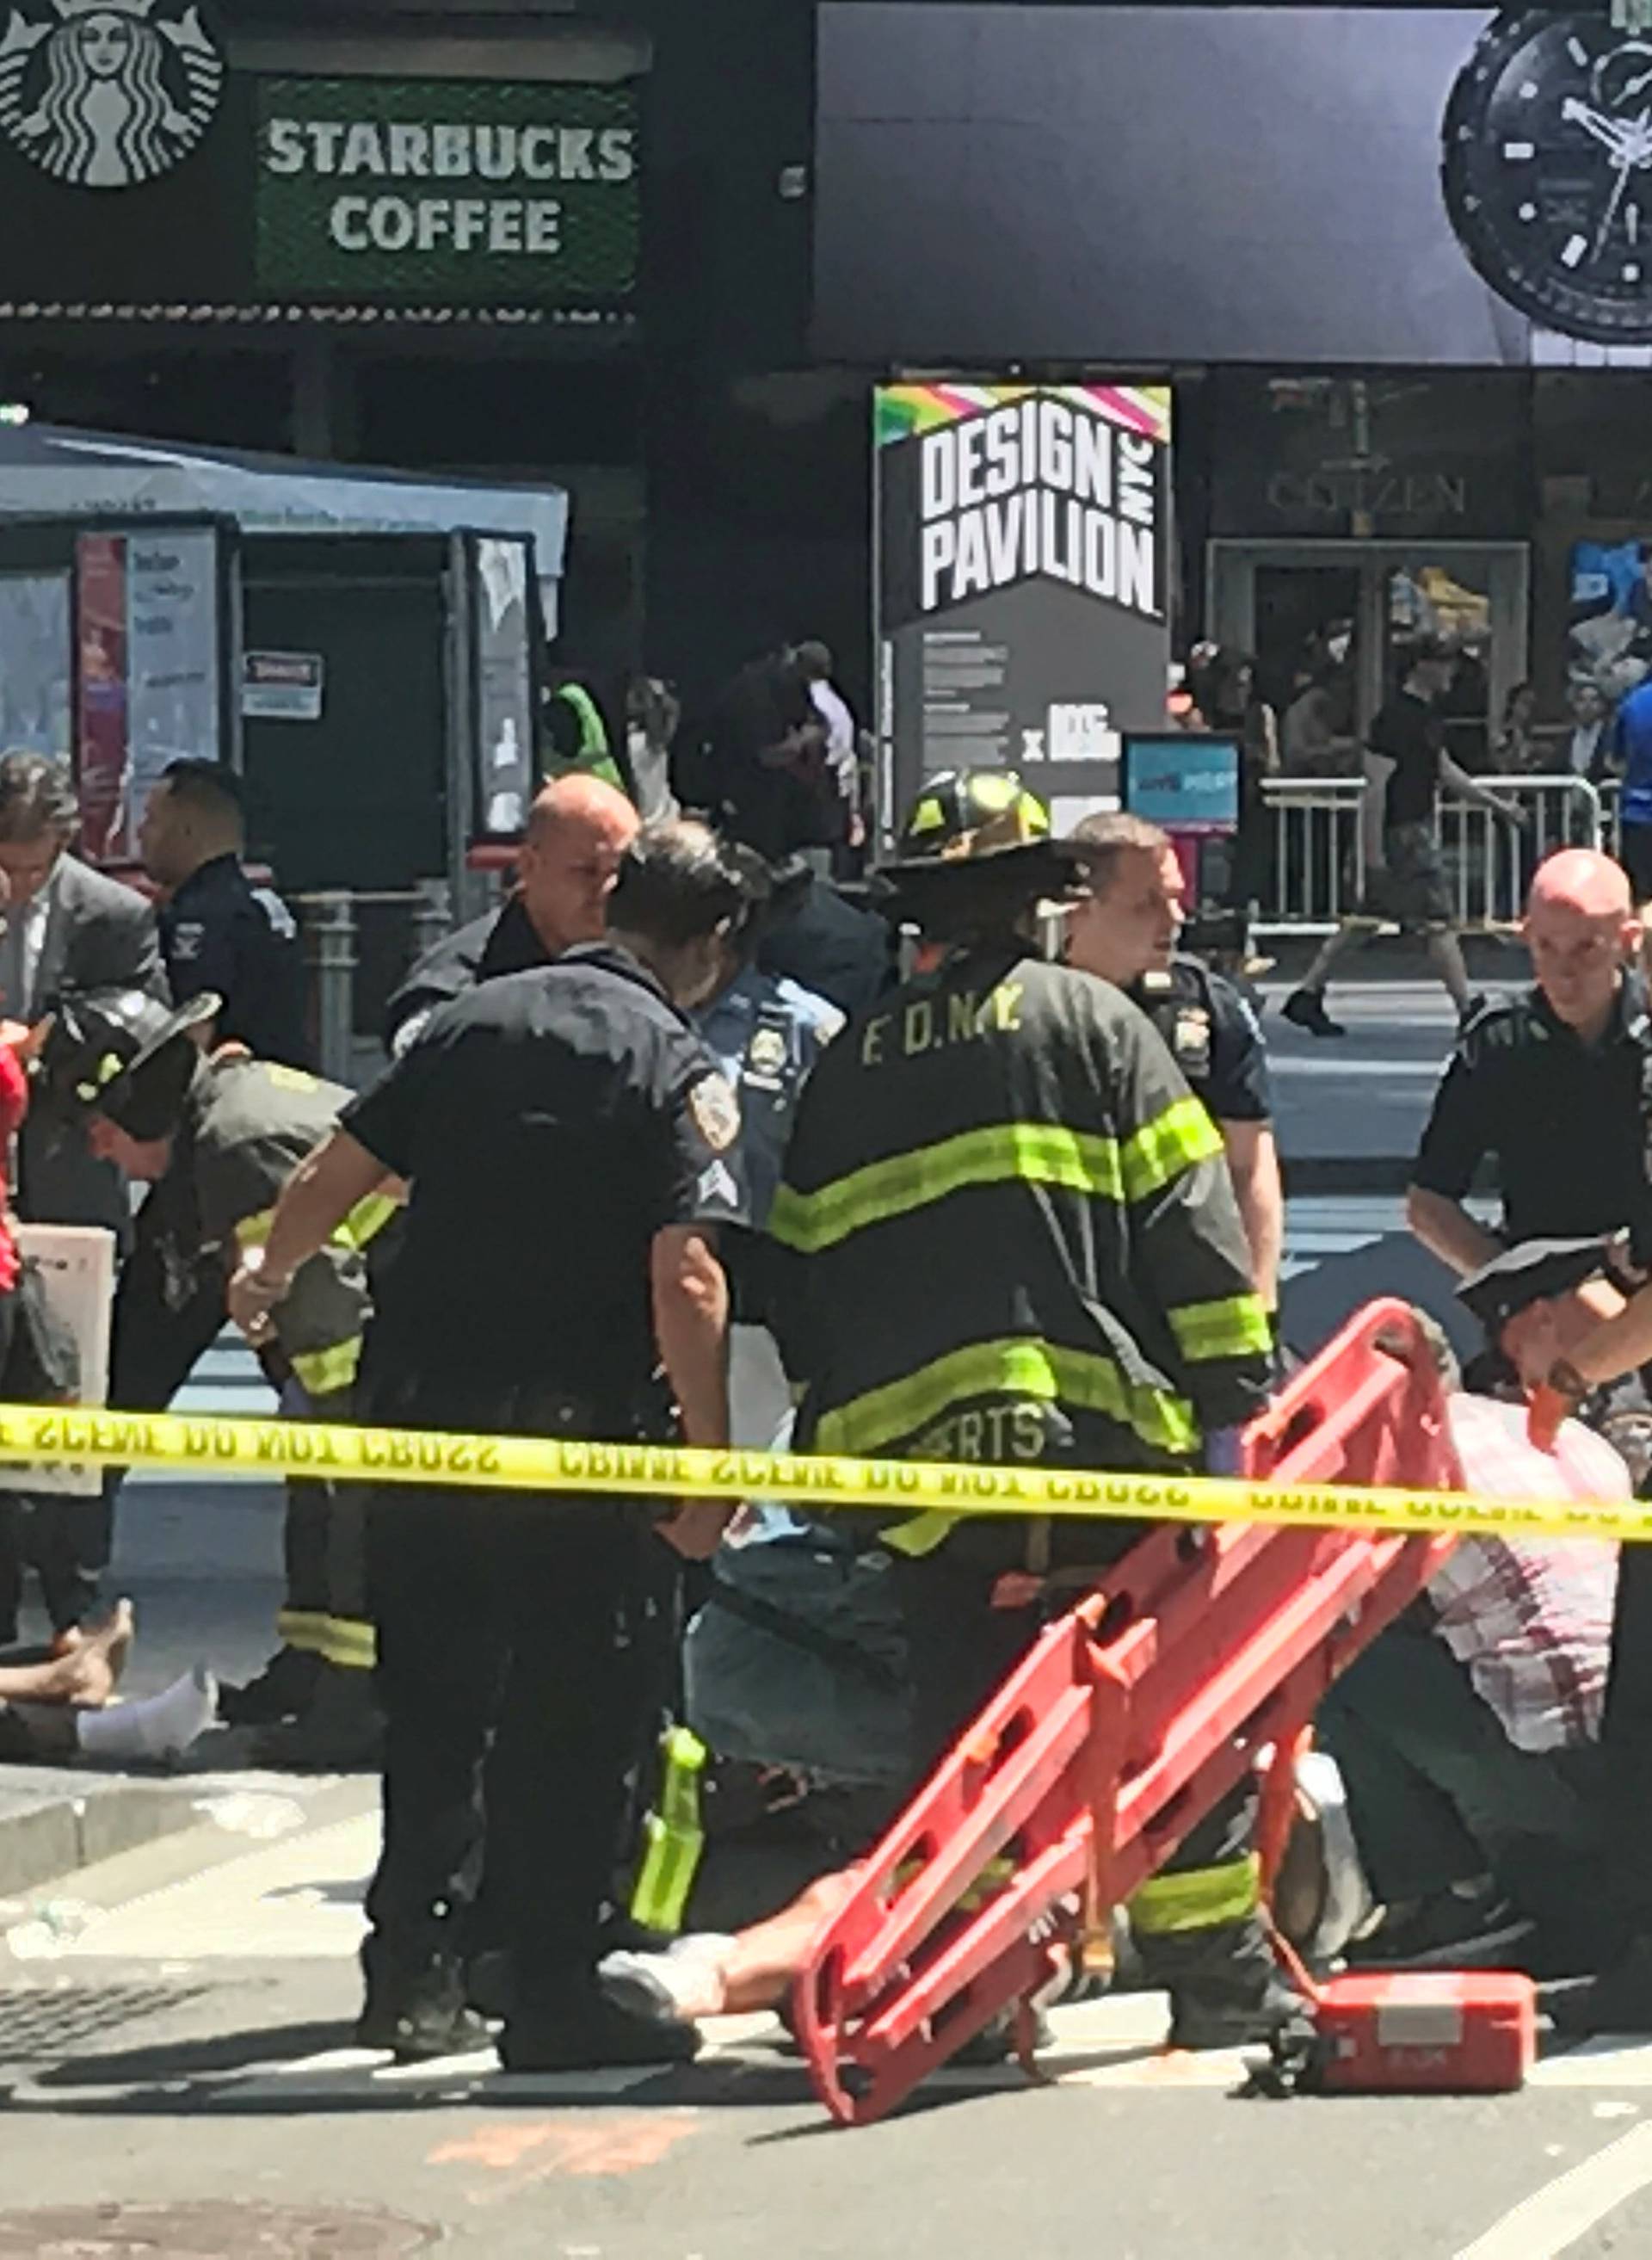 First responders are assisting injured pedestrians after a vehicle struck pedestrians on a sidewalk in Times Square in New York